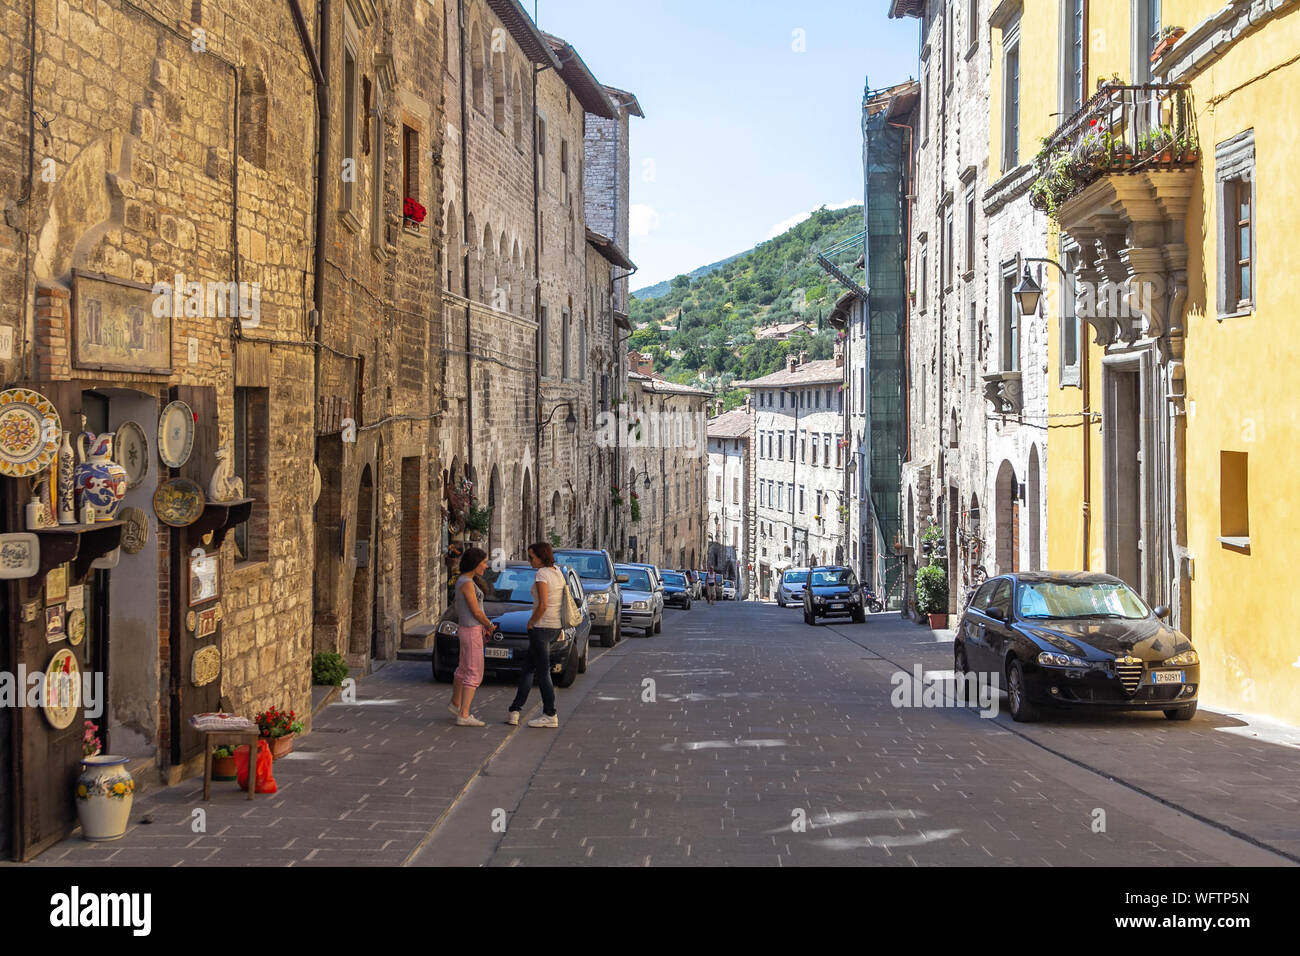 Gubbio, Italy - July 16, 2012: the streets of Gubbio, at Umbria Italy, with a few people and cars parked Stock Photo